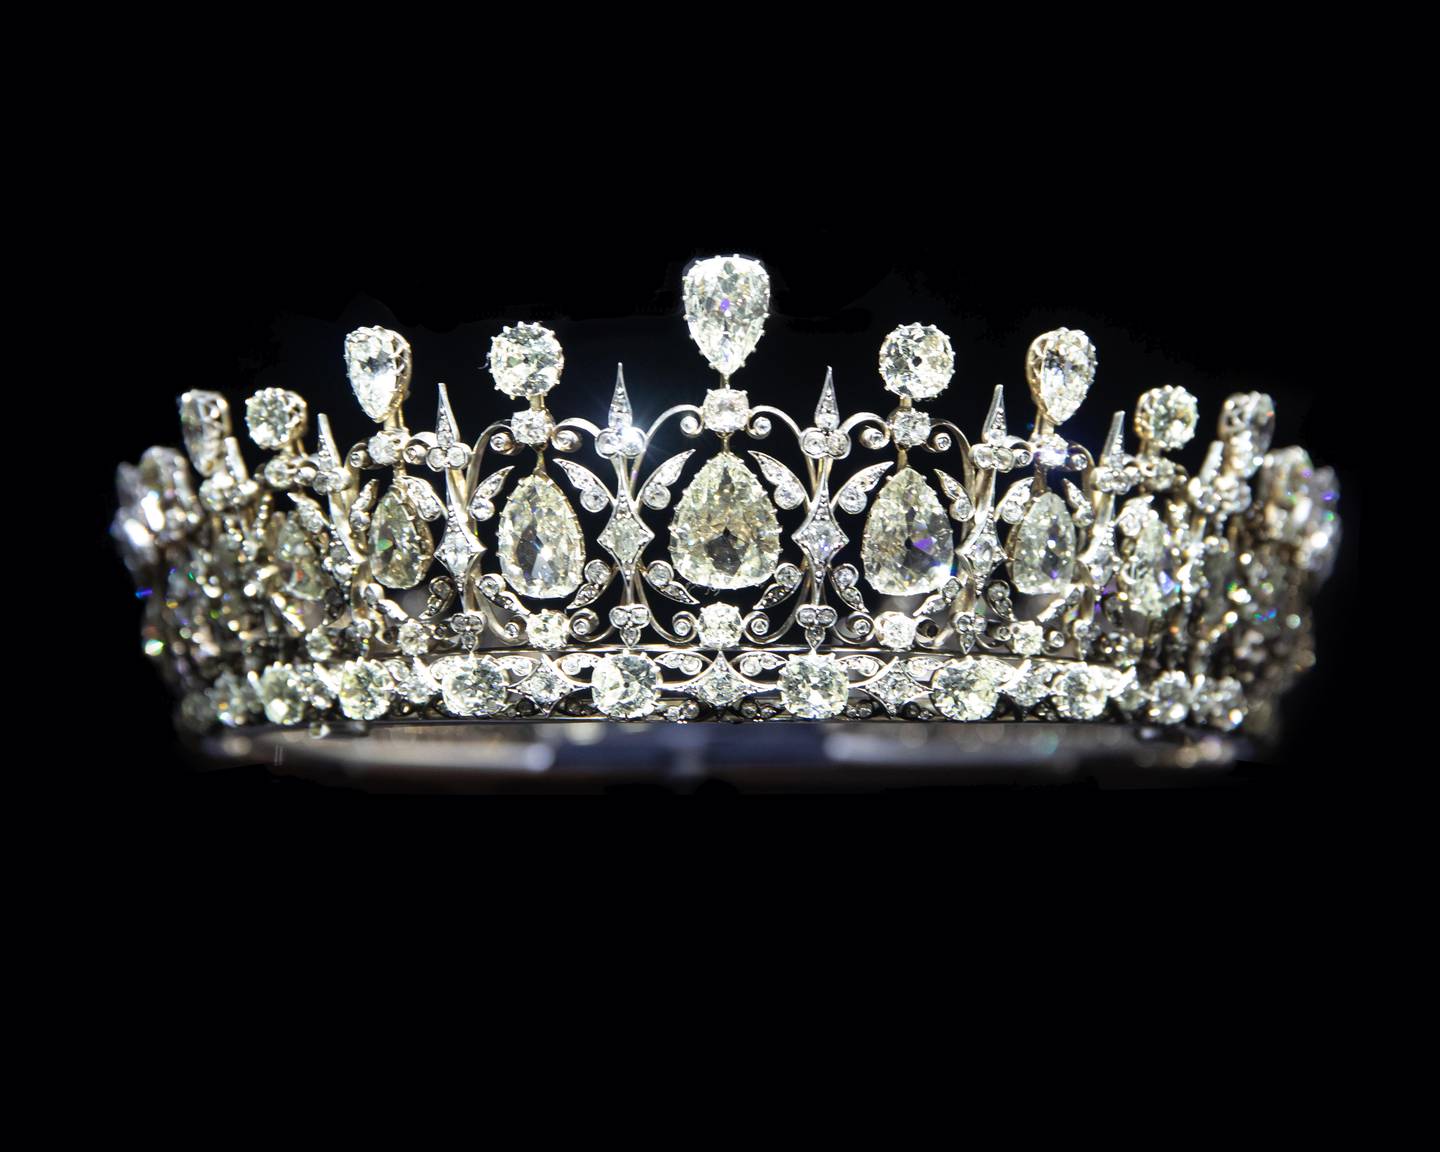 The Fife Tiara features an innovative flexible stem setting that allowed diamond's to vibrate with the wearer's movement. Kensington Palace,